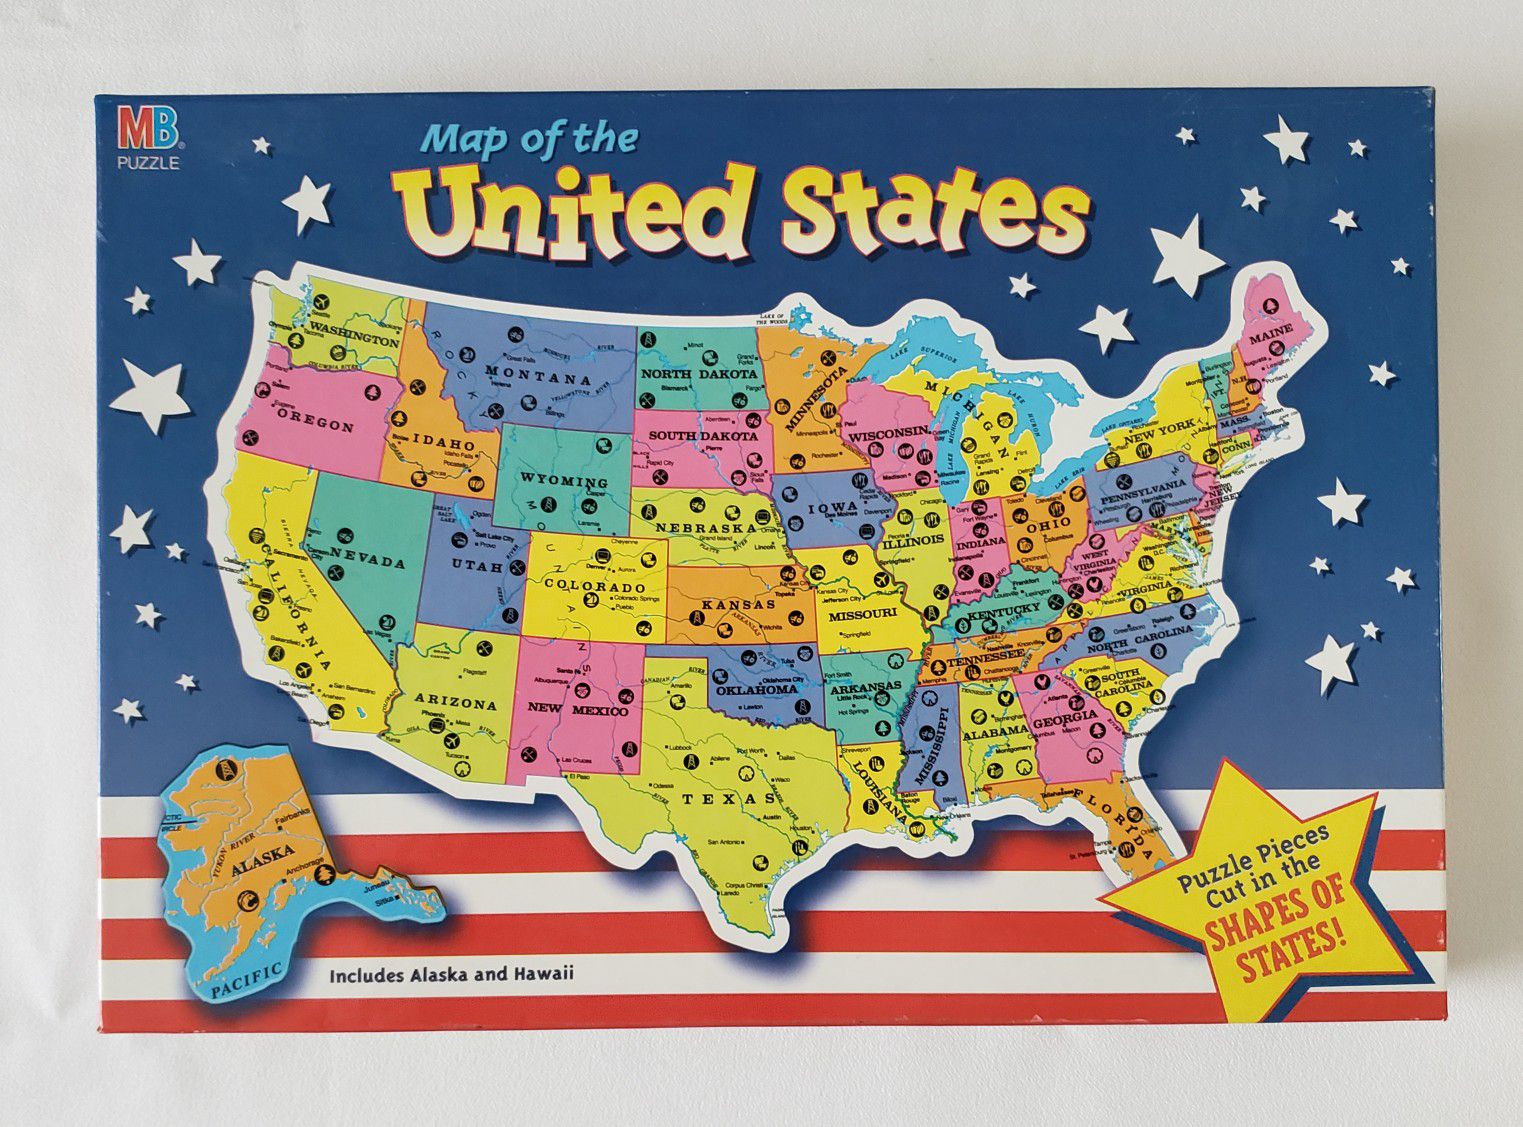 Map of the United States, Includes Alaska & Hawaii, by Milton Bradley